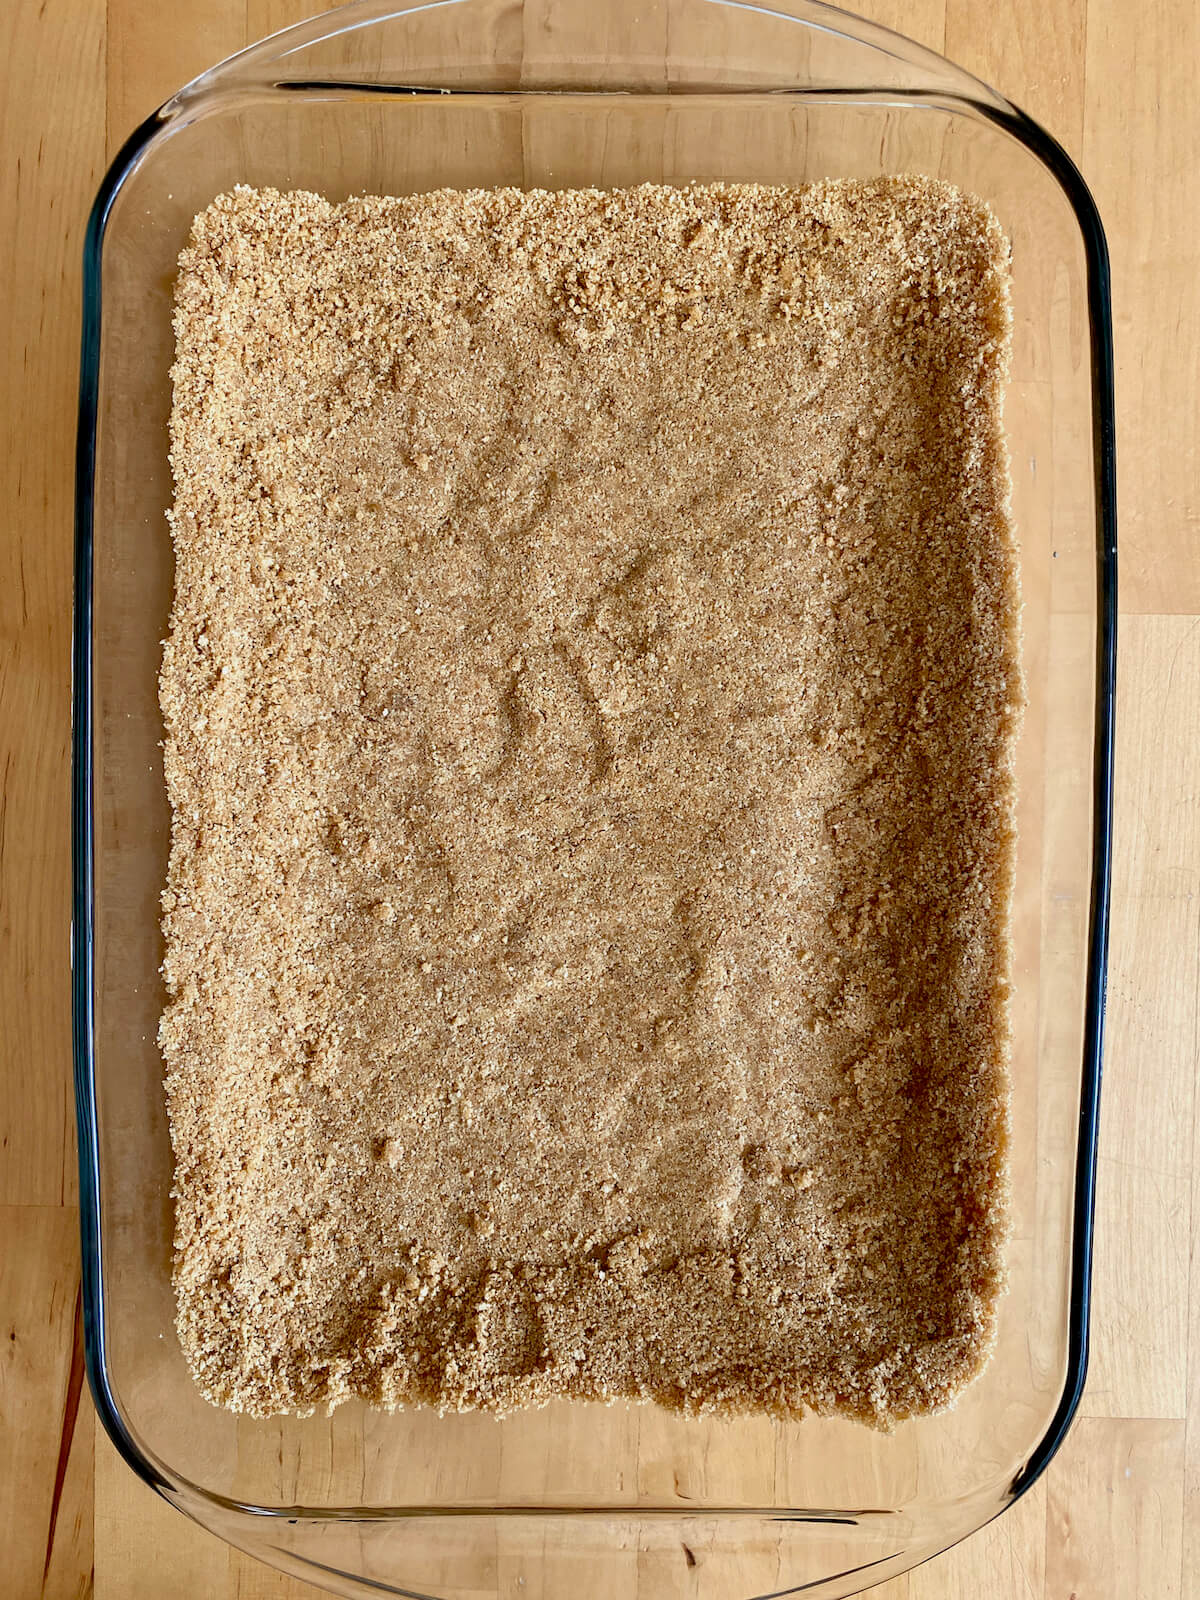 Graham cracker crust pressed into a glass 9 inch by 13 inch baking dish.